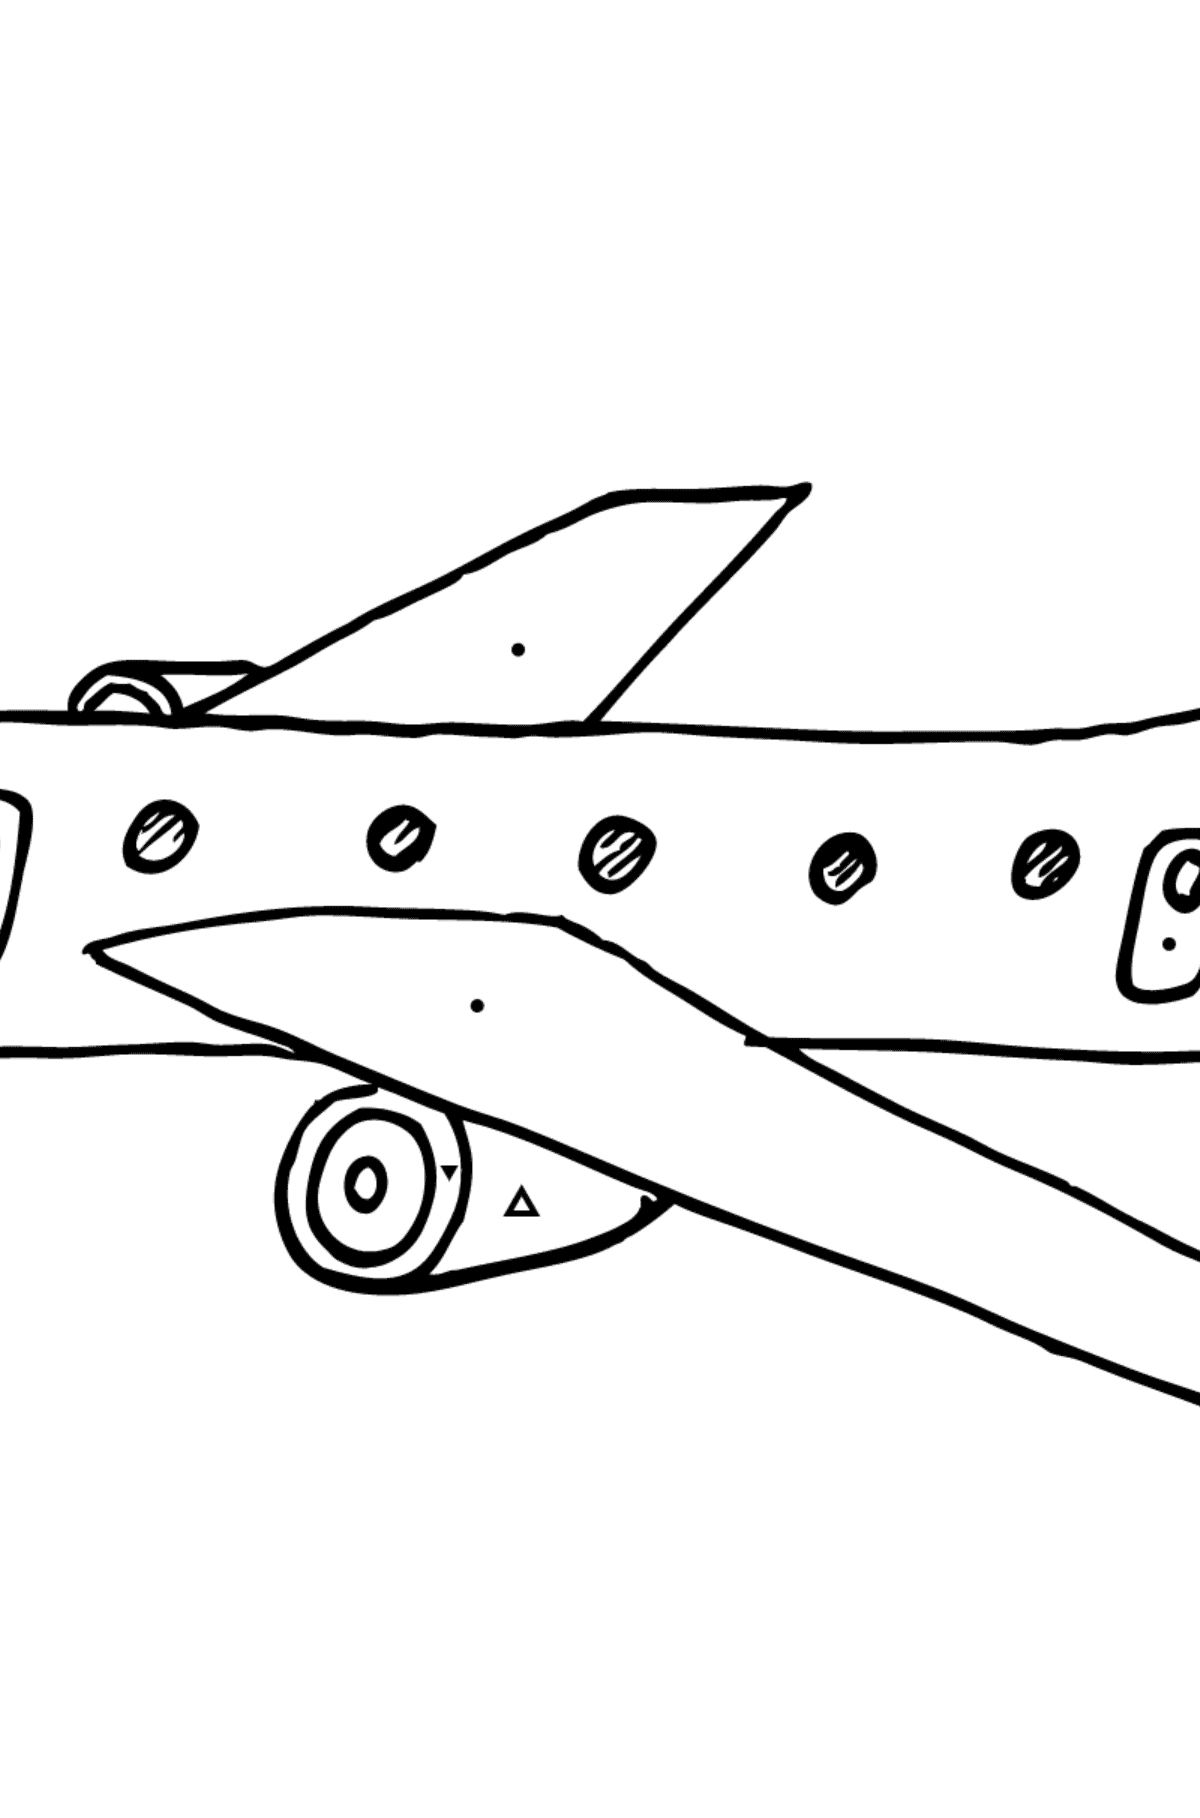 Coloring Page - A Commercial Jet - Coloring by Symbols for Kids